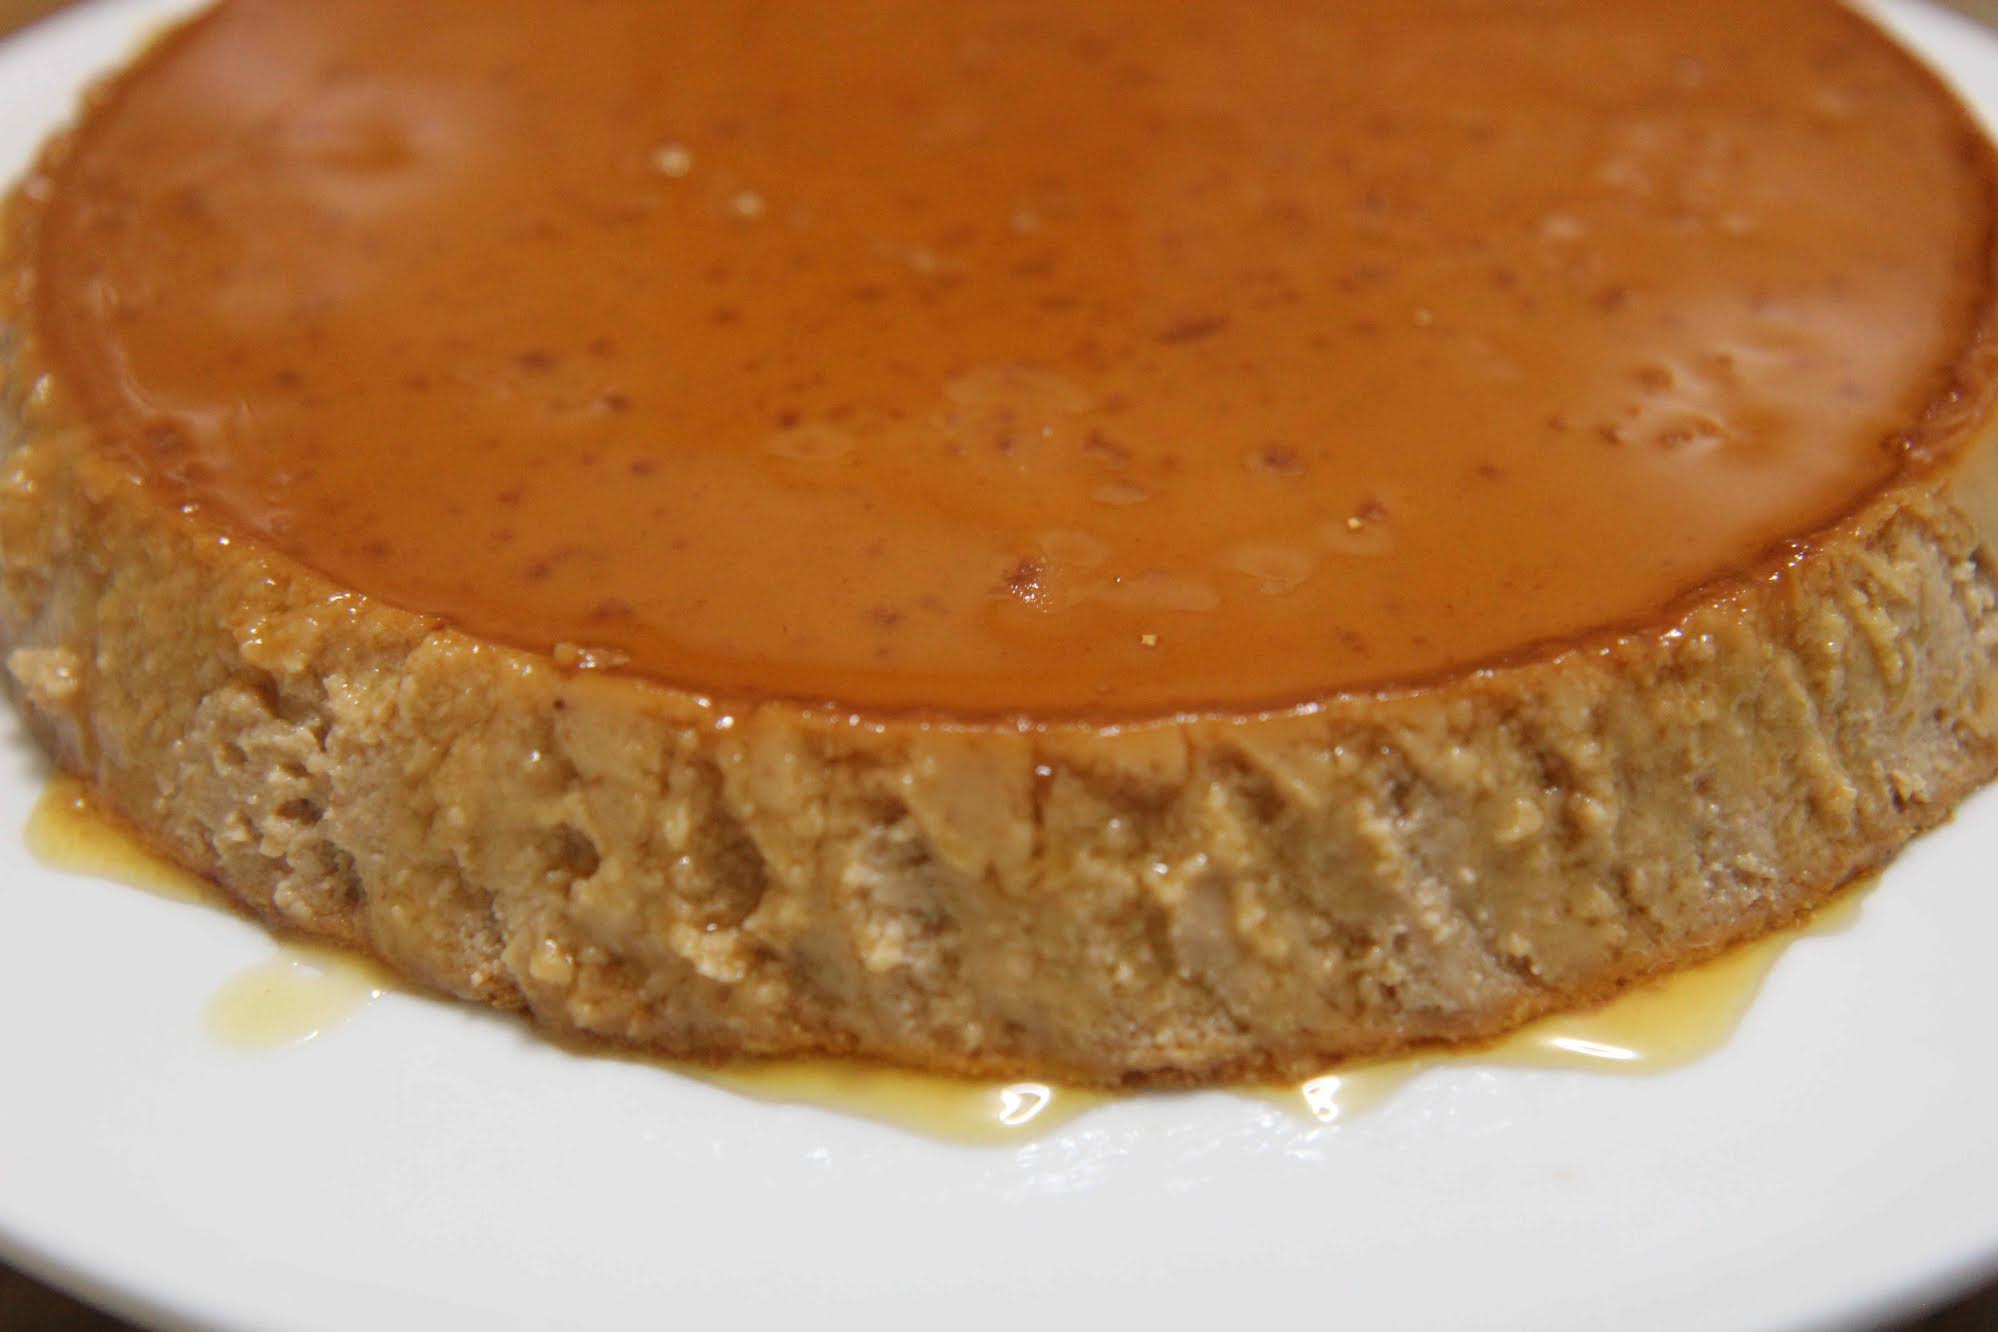 Flan is a staple in most pan-Latin cuisines. Here's a take the uses guava.